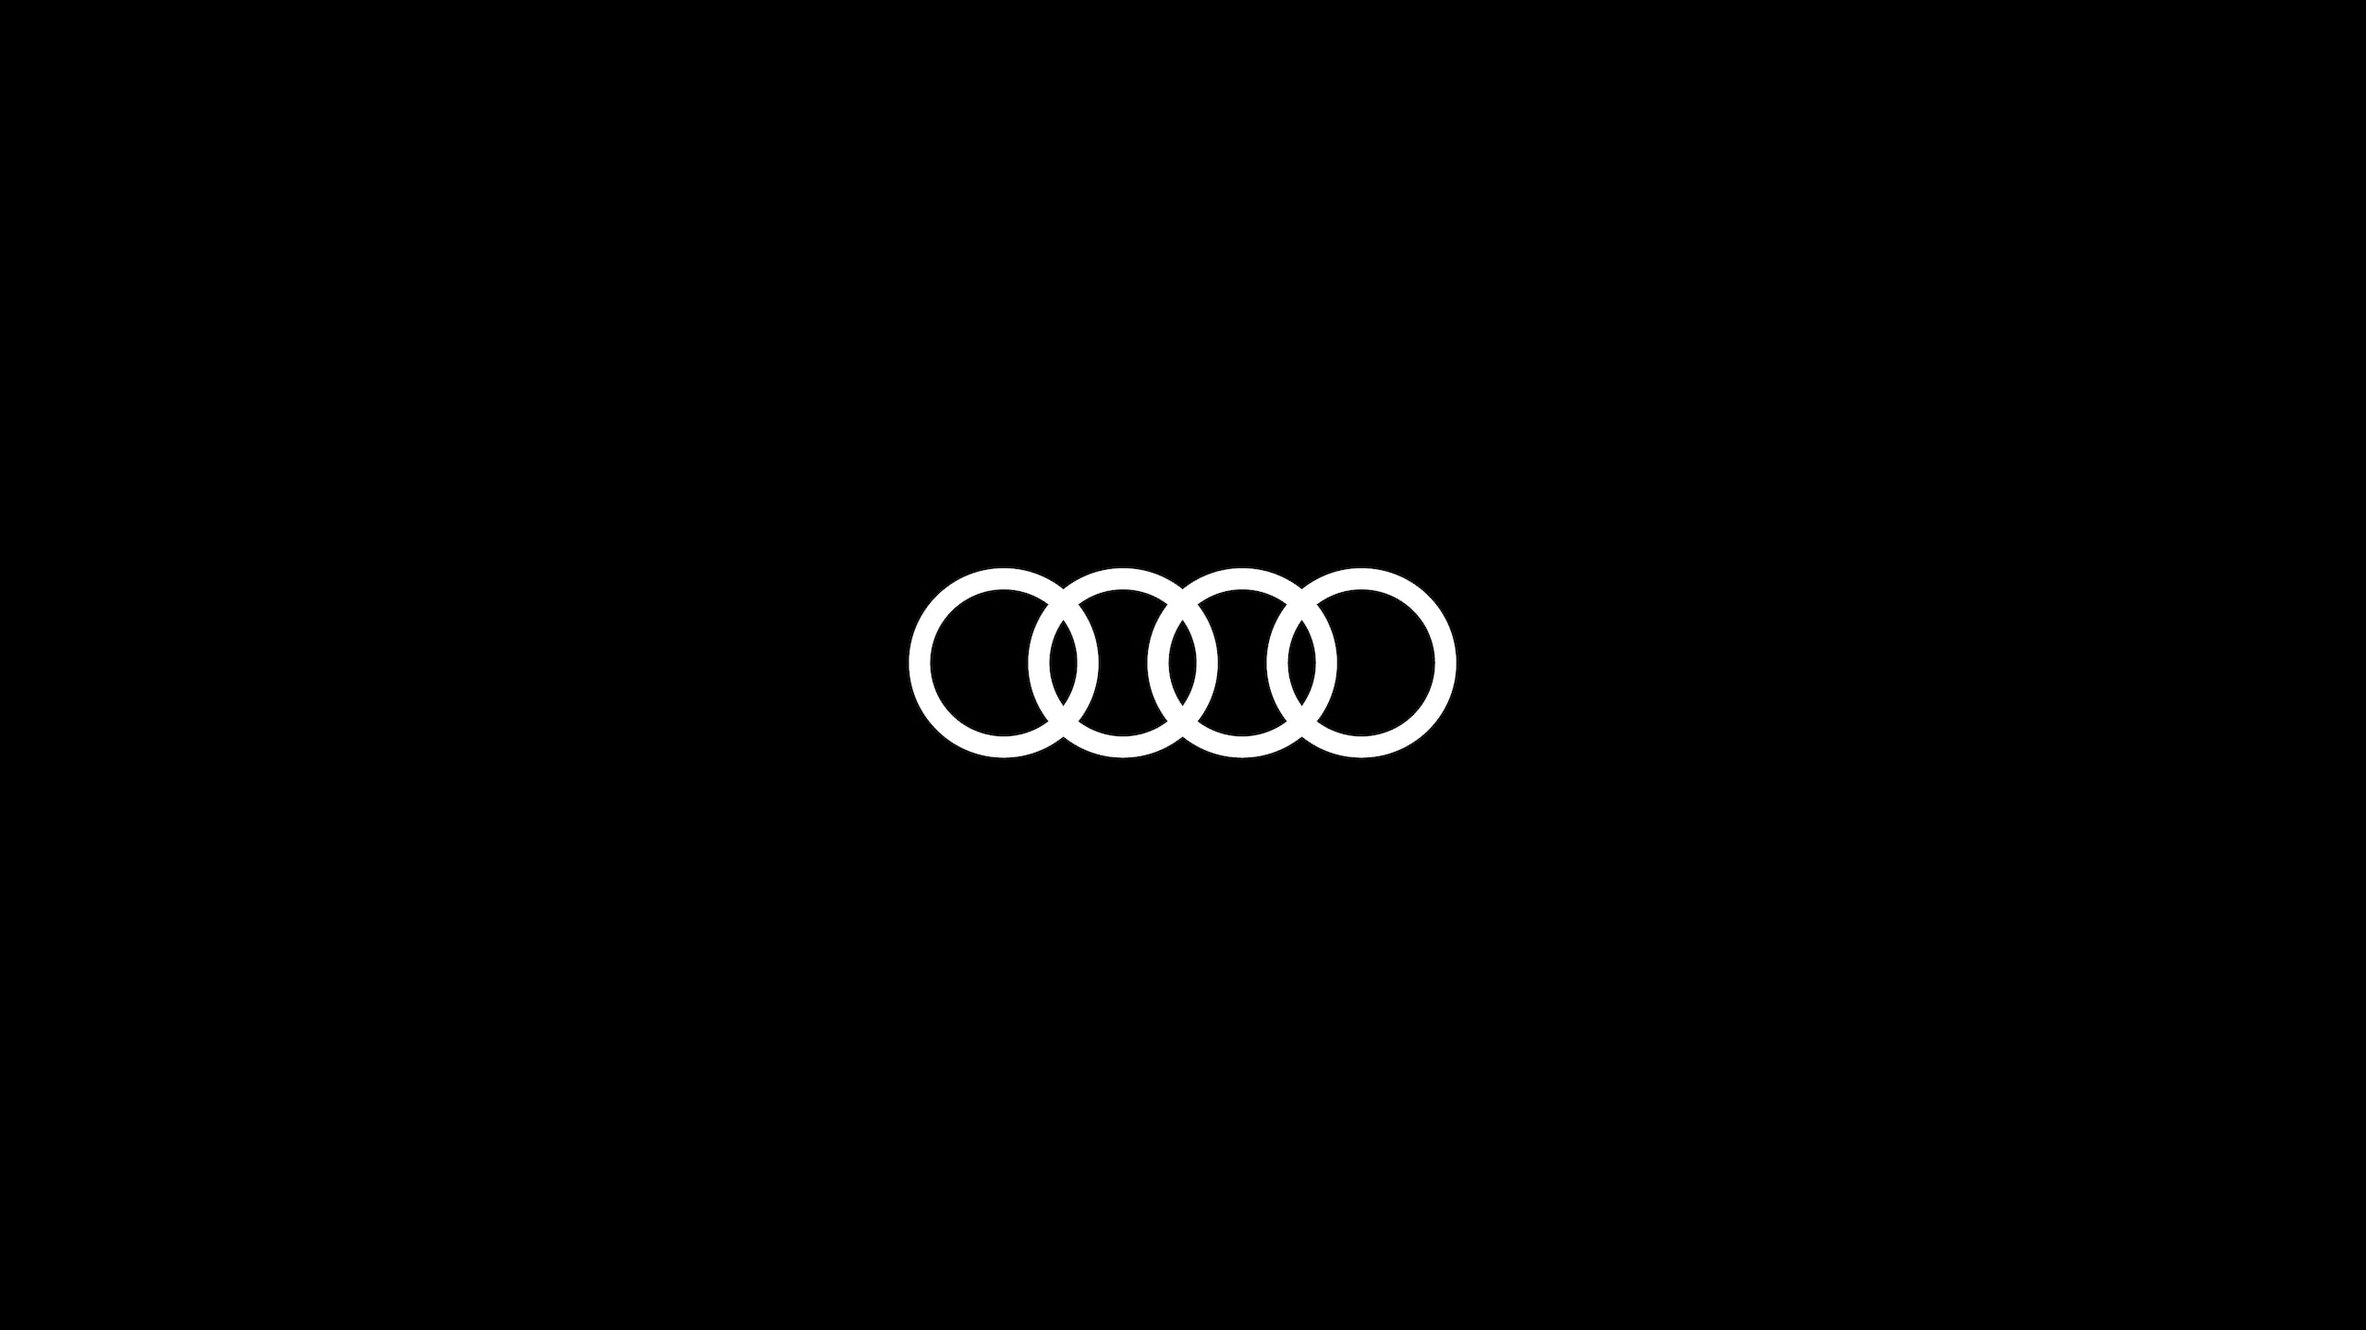 Seeking Male Lead for an Audi Q8 Commercial